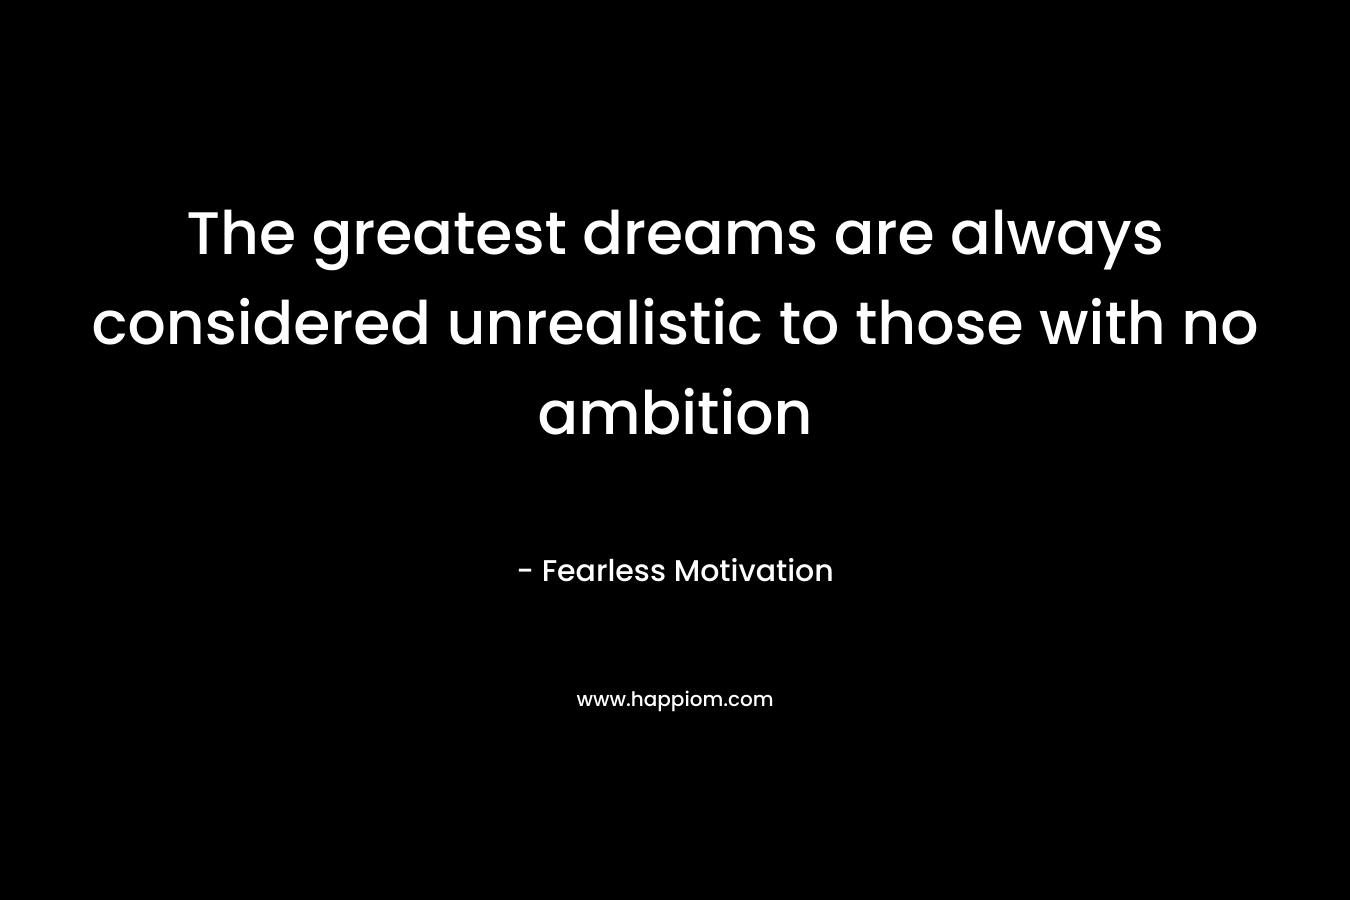 The greatest dreams are always considered unrealistic to those with no ambition